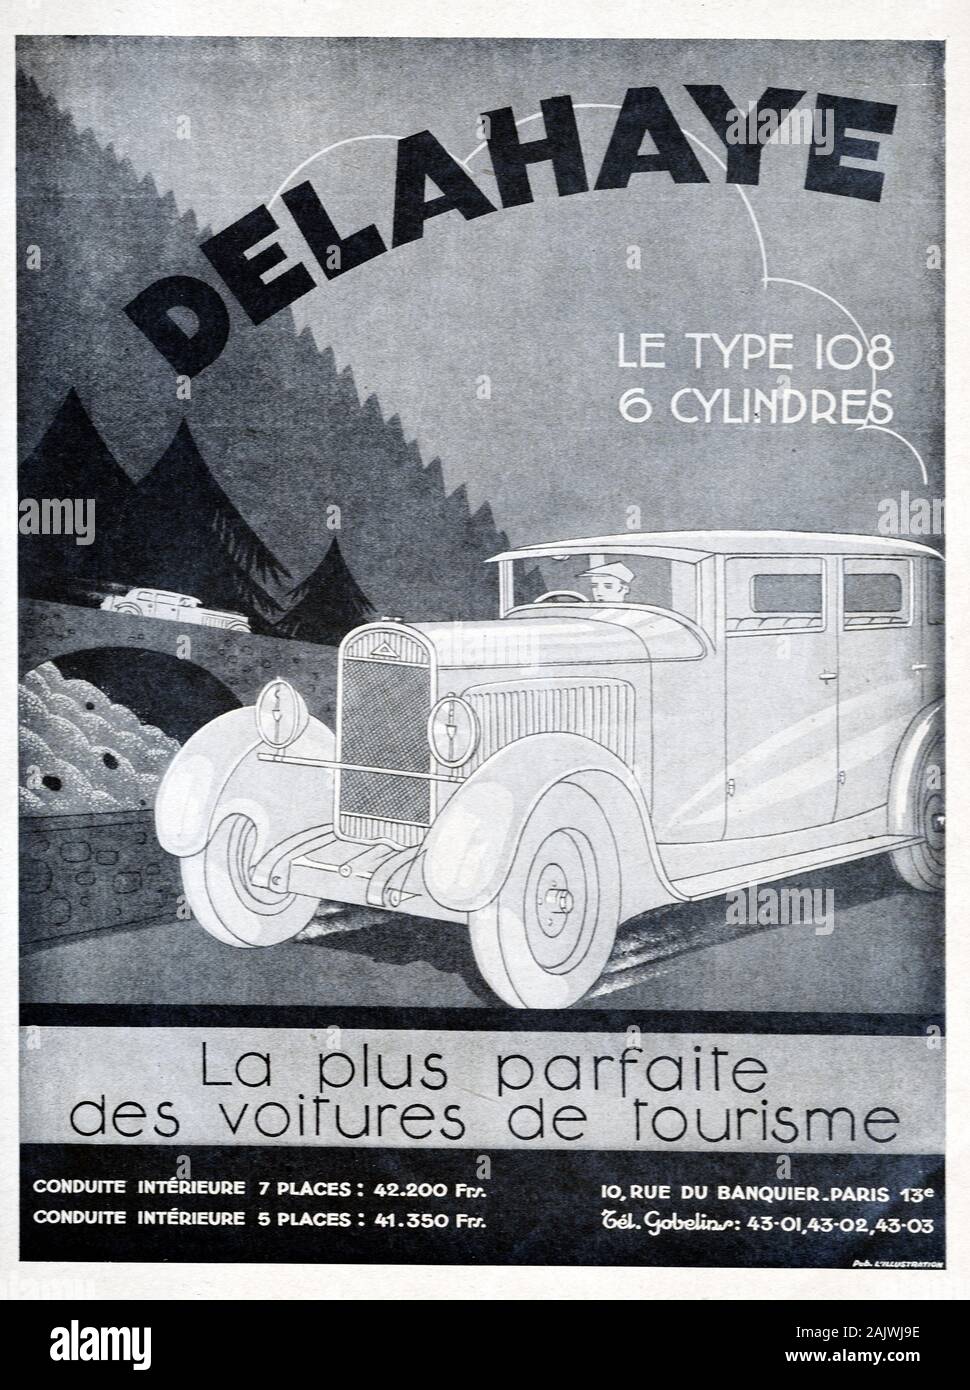 Vintage Advert, Publicity or Old Advert for French Luxury Car or Limousine Delahaye 108 Six Cylinder 1931 (Produced 1929-33) Stock Photo